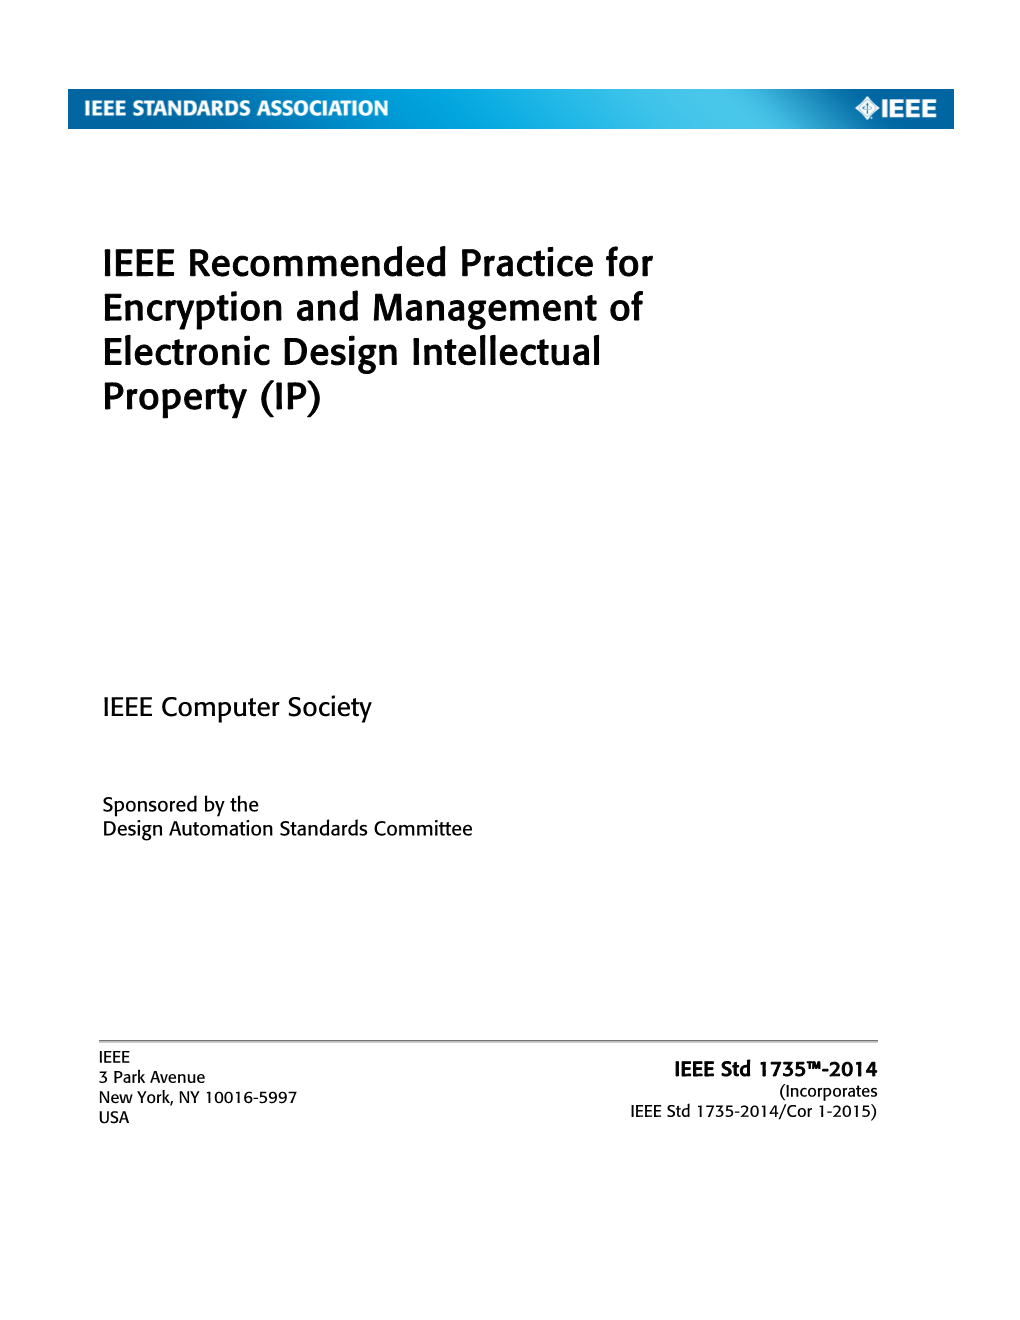 IEEE Recommended Practice for Encryption and Management of Electronic Design Intellectual Property (IP)